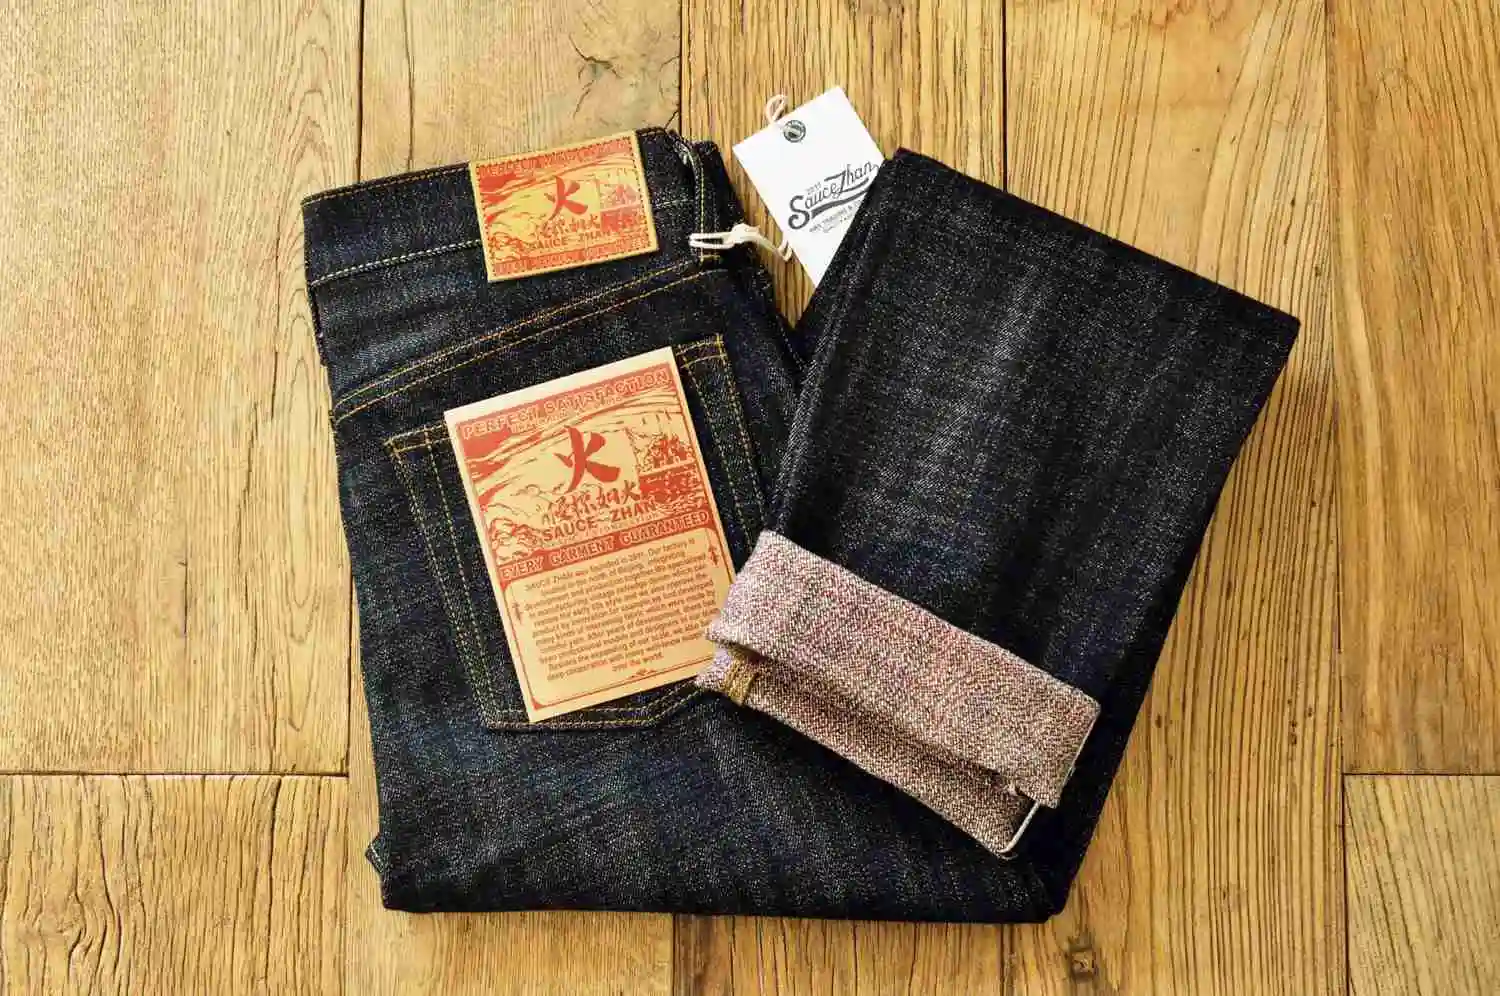 

EX315XX-BO-Fire Jeans for Men Furinkazan Selvedge Jeans Mens Jeans Taper Fit 16.8 OZ Silver-plated Buttons Raw Denim